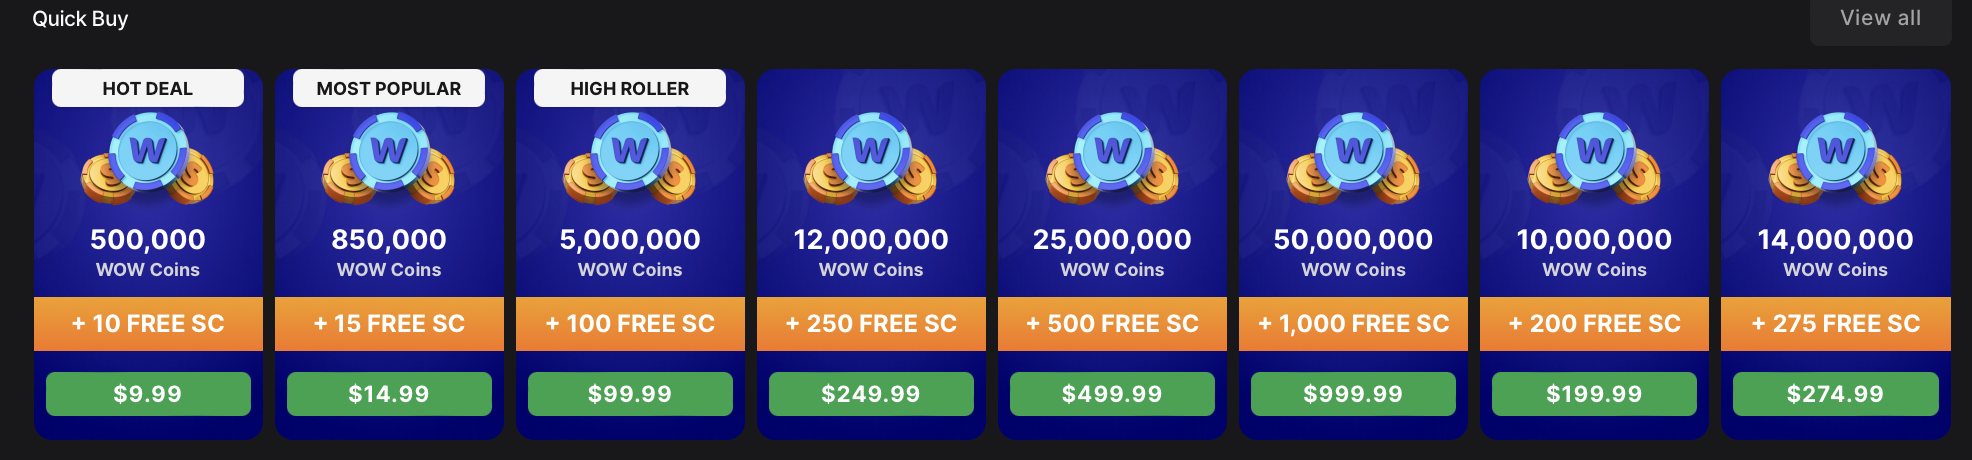 WOW Vegas coin packages